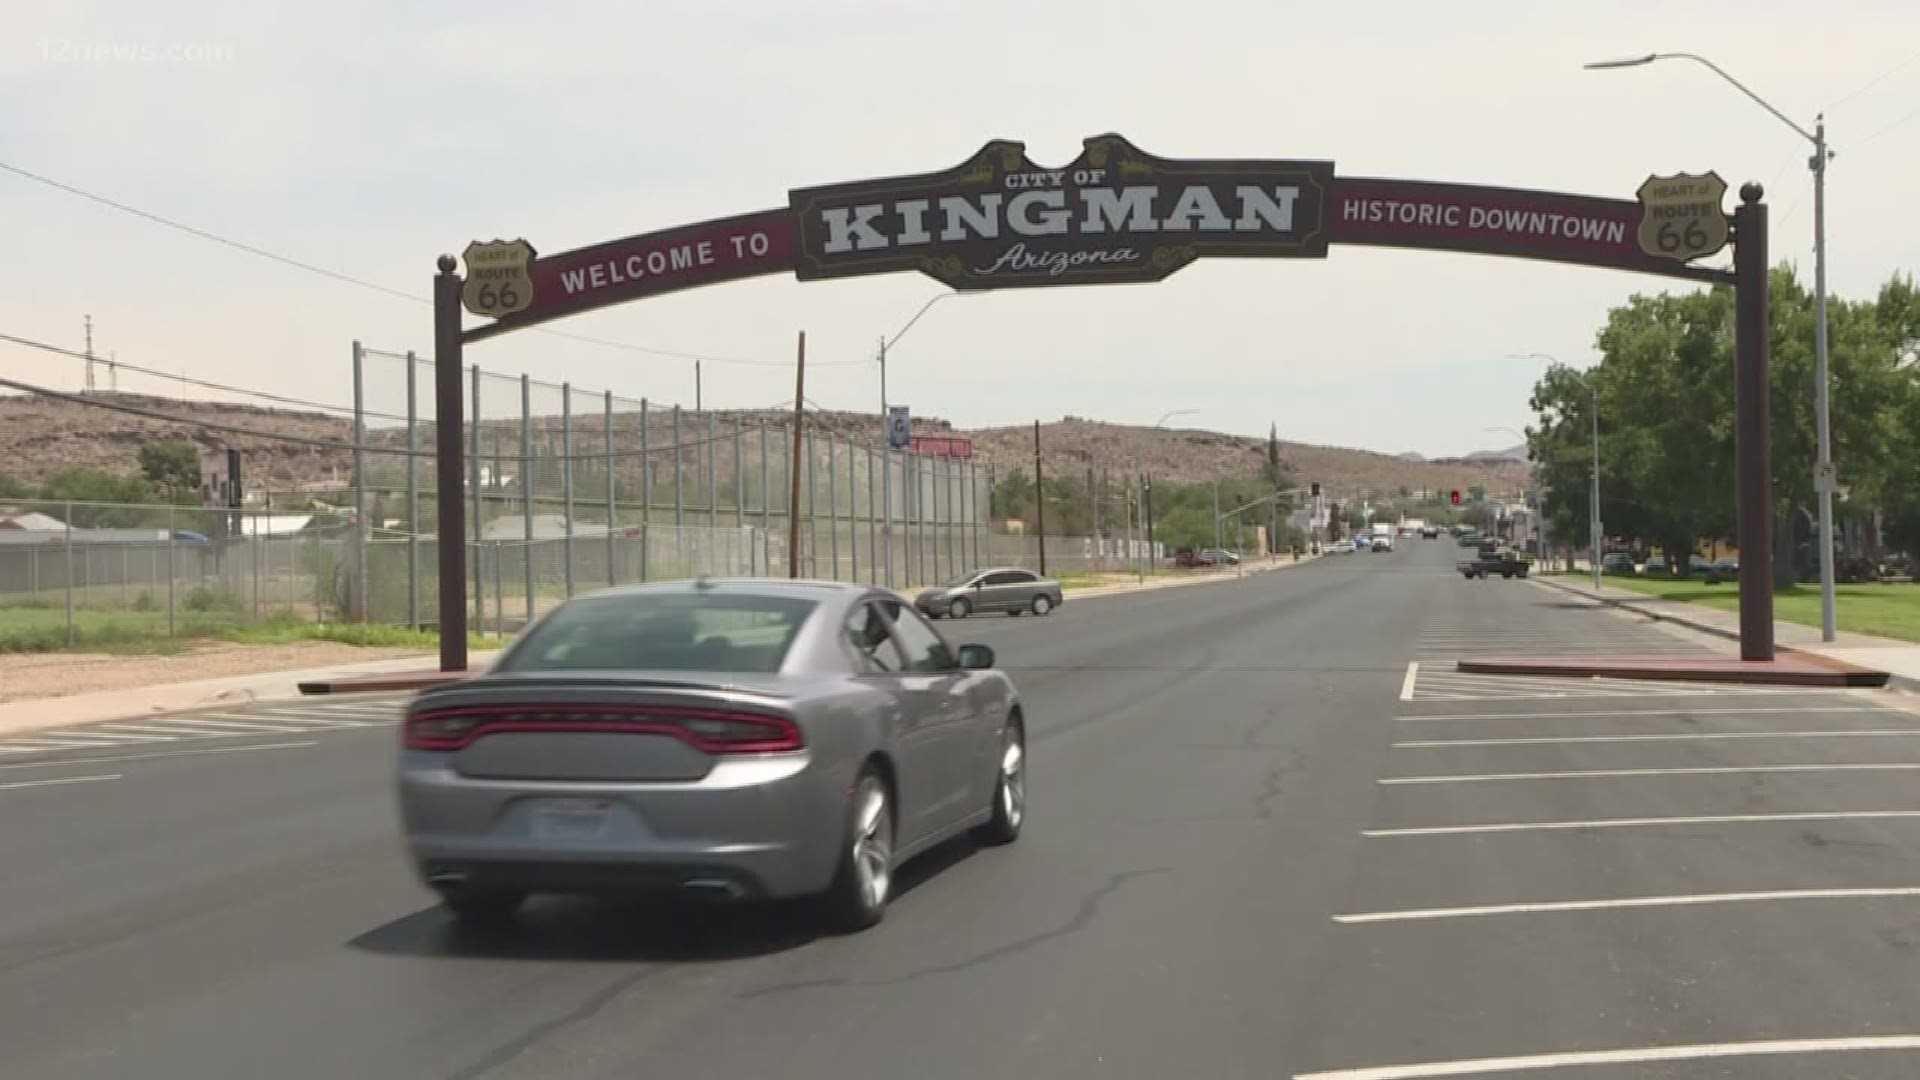 Comedian Sacha Baron Cohen visited Kingman, Arizona and spoke to some residents. What they had to say has painted the town as racist. Kingman's mayor and other residents respond to the clip.